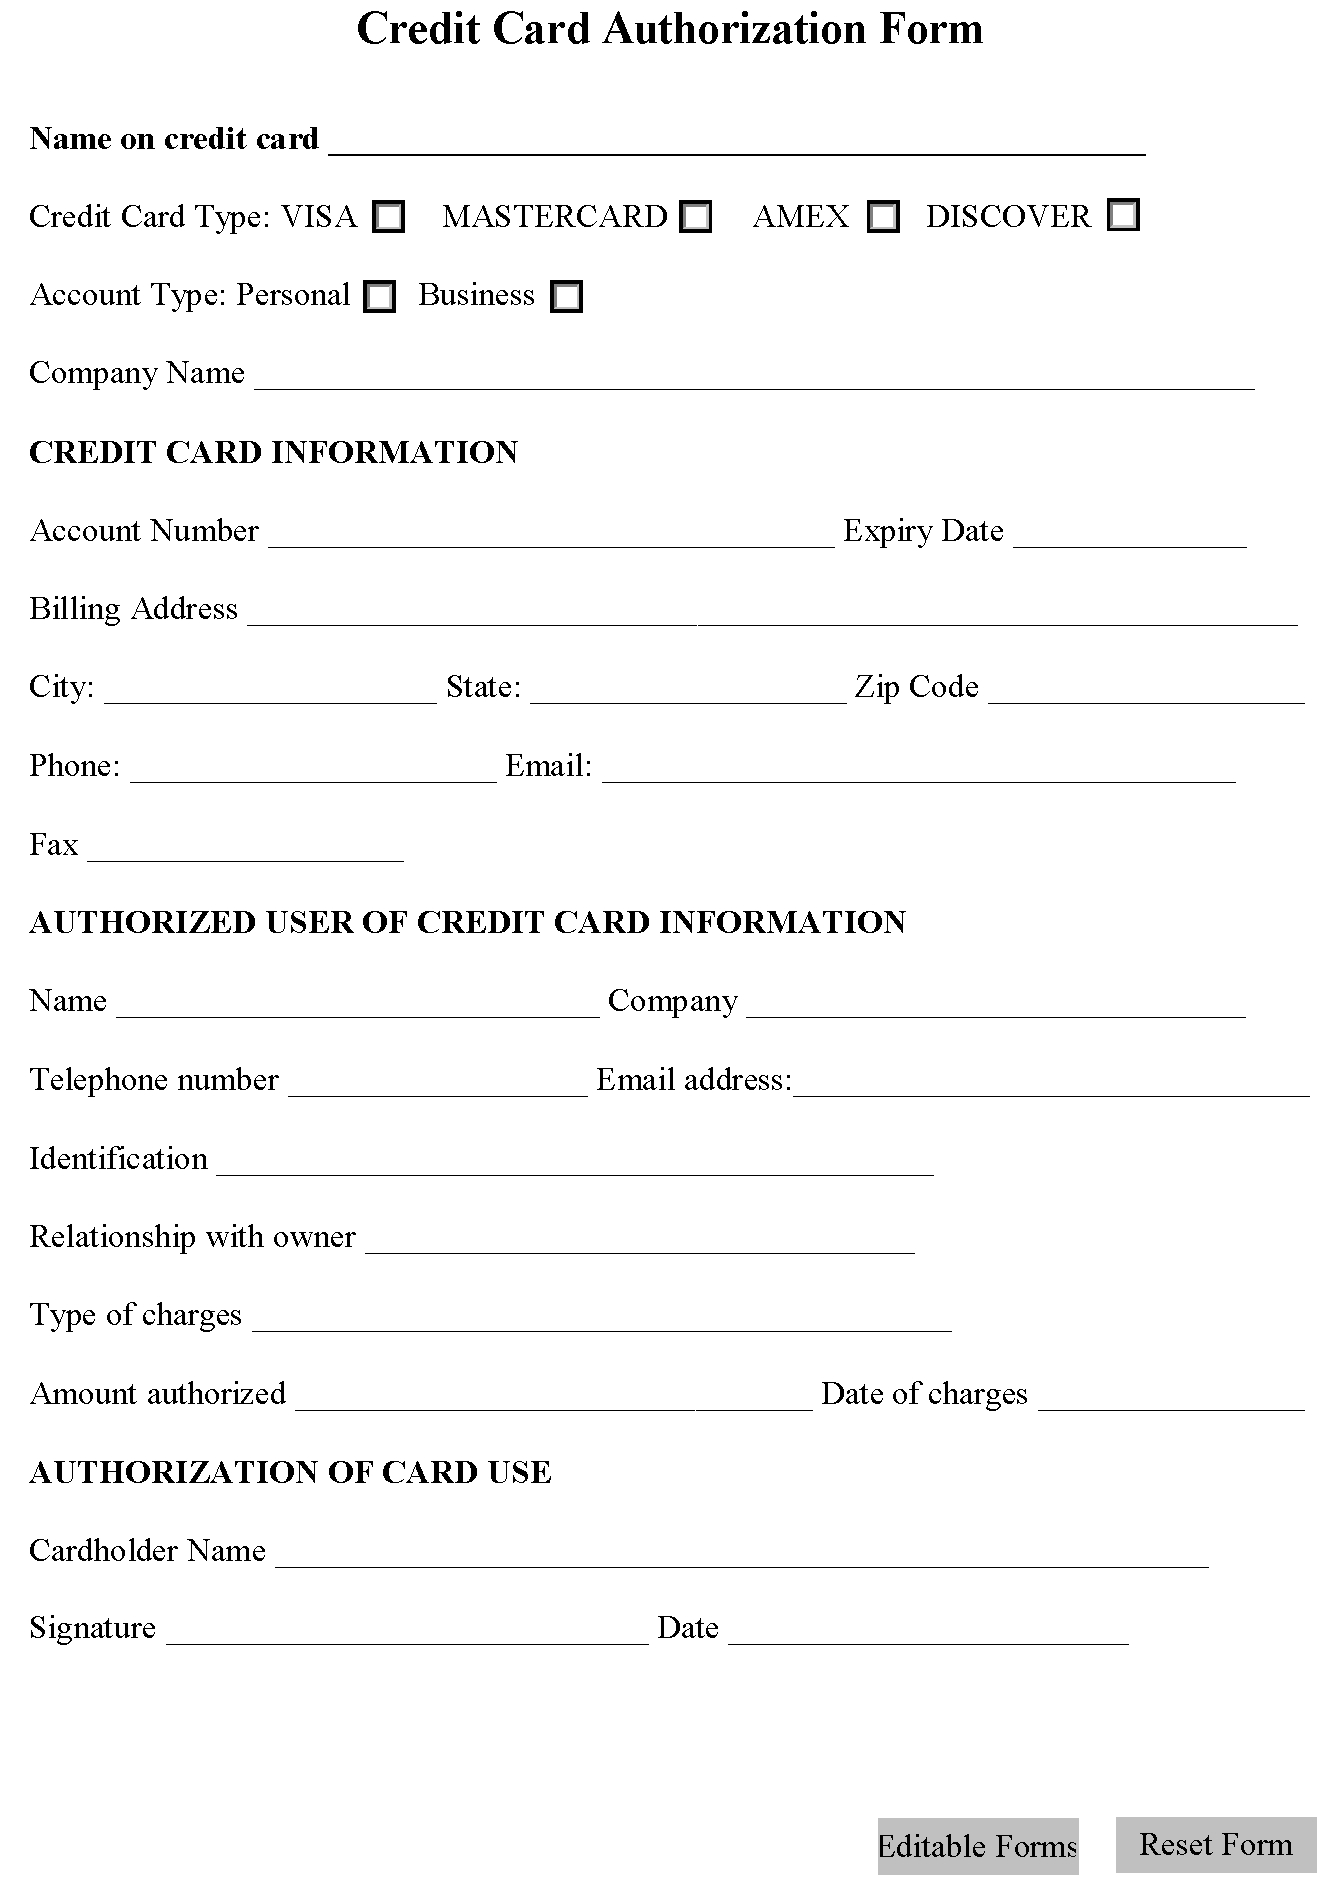 Credit Card Authorization Form | Editable Forms With Regard To Credit Card Authorization Form Template Word